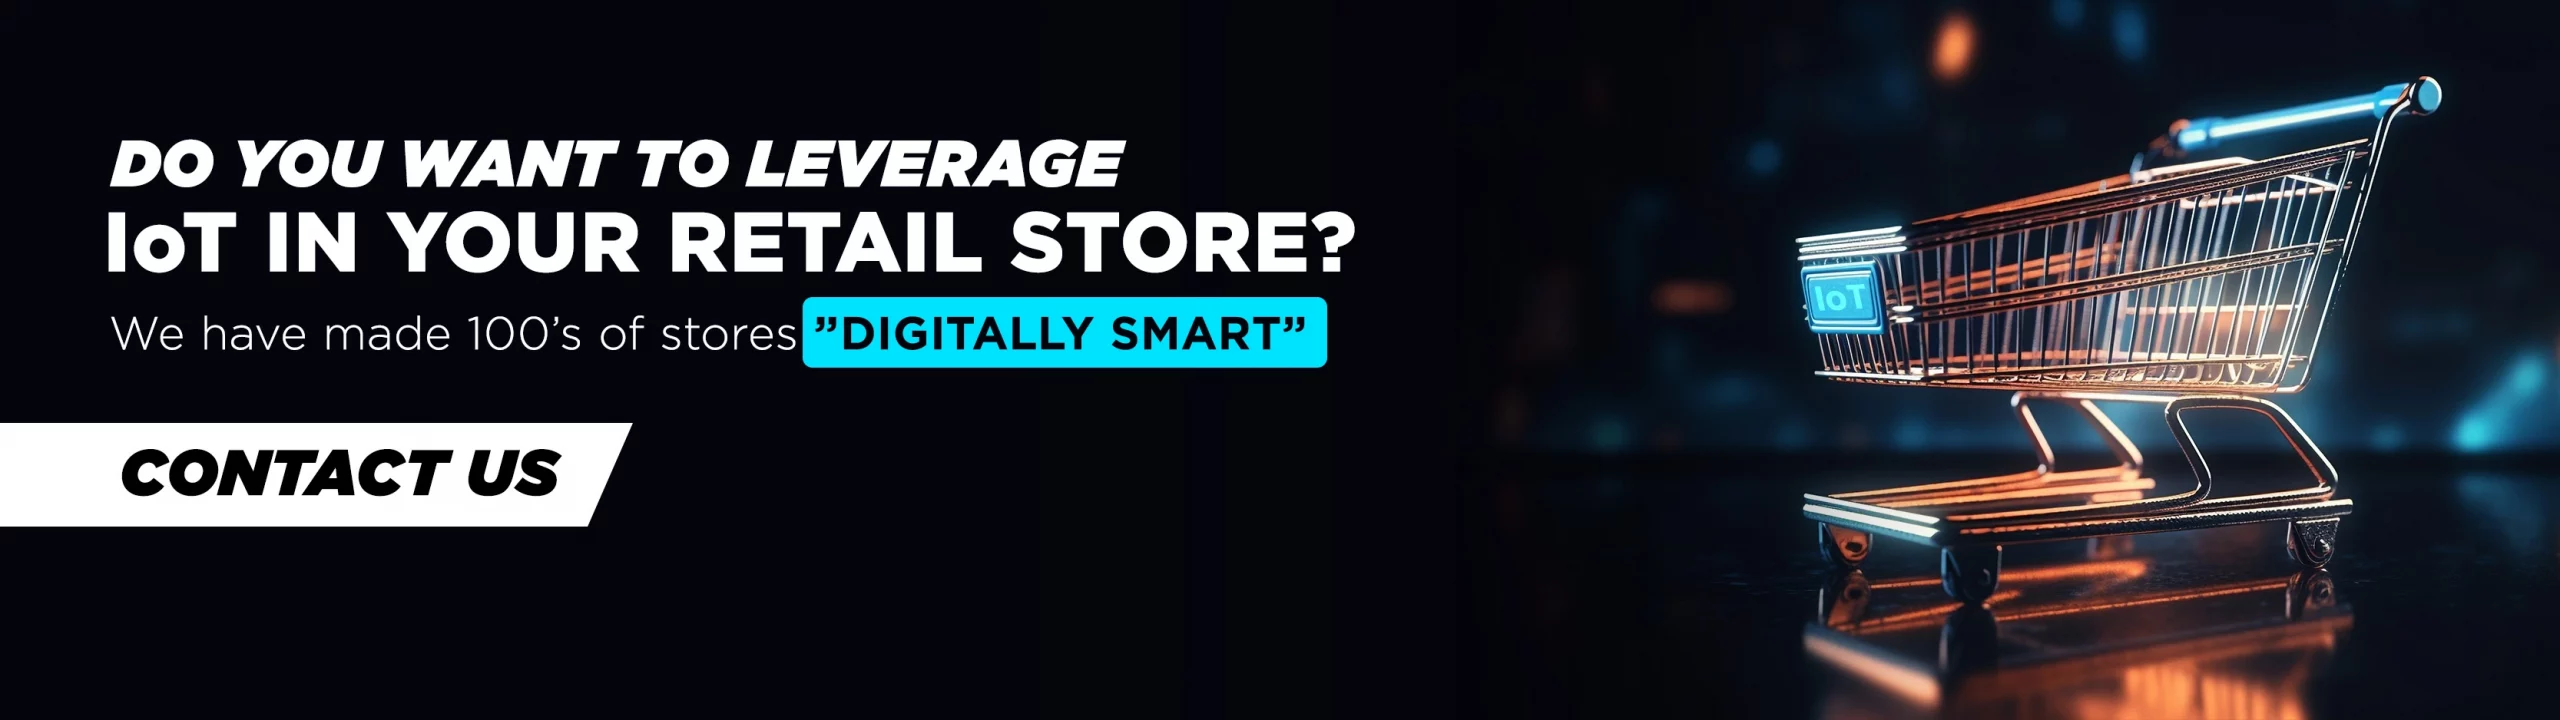 Leverage IoT in Your Retail Store